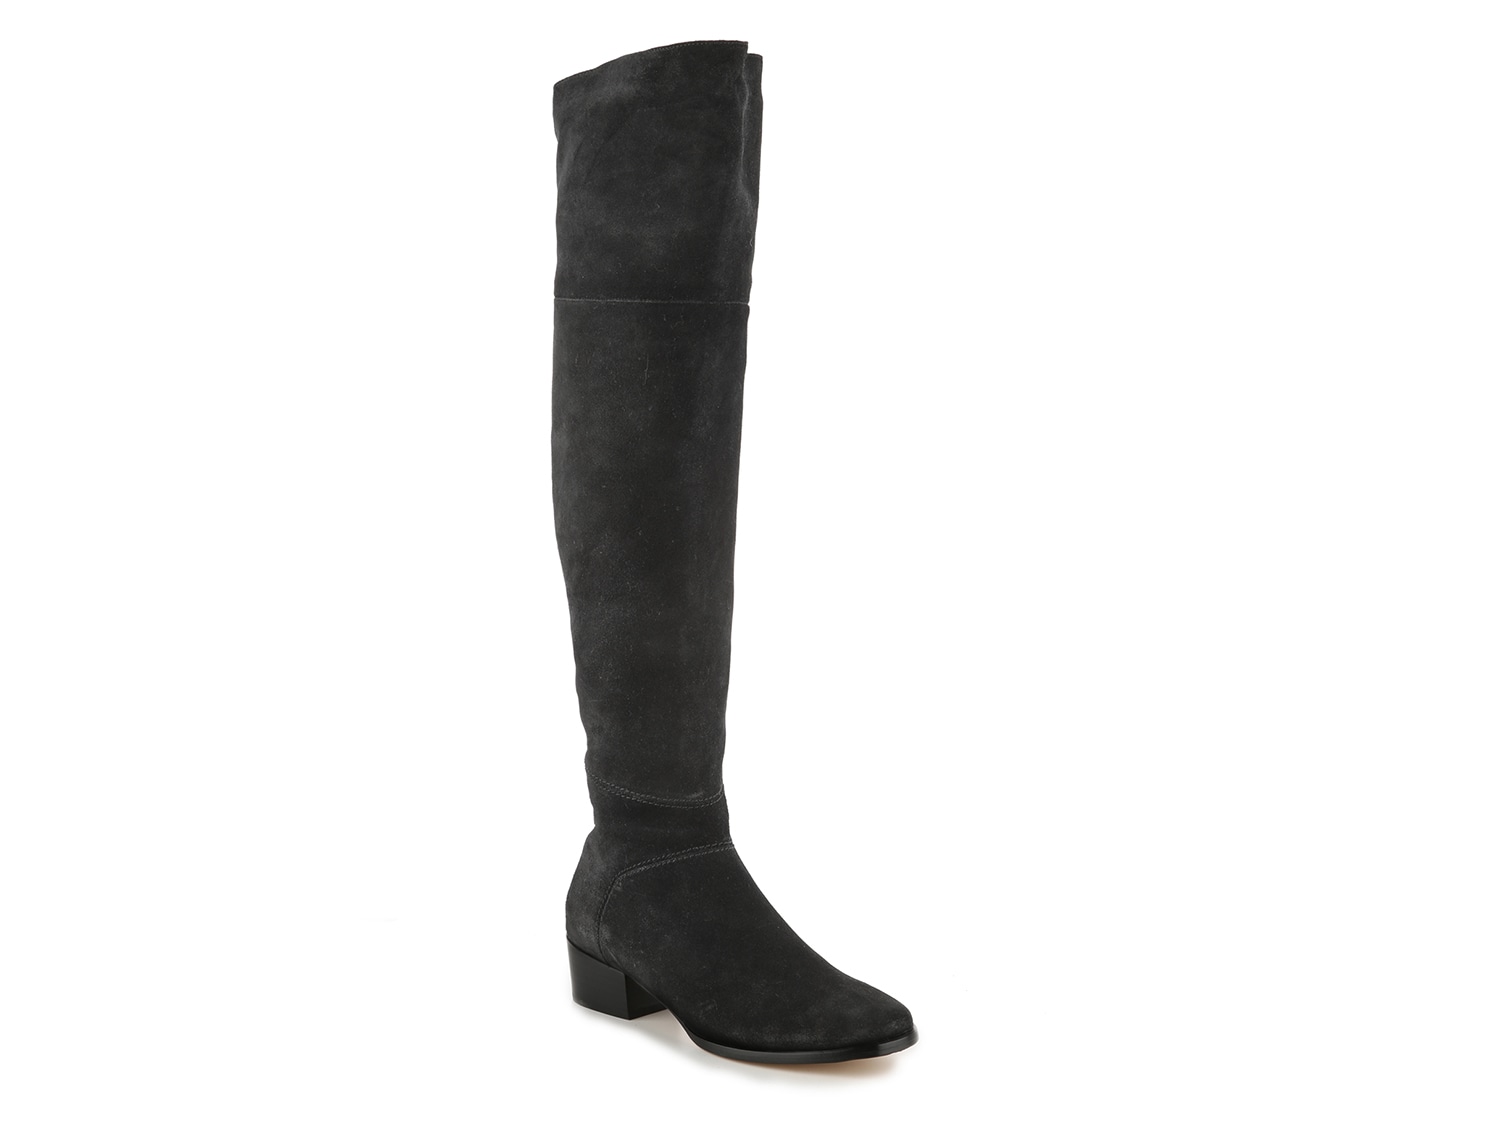 Joie Reeve Over-the-Knee Boot - Free Shipping | DSW